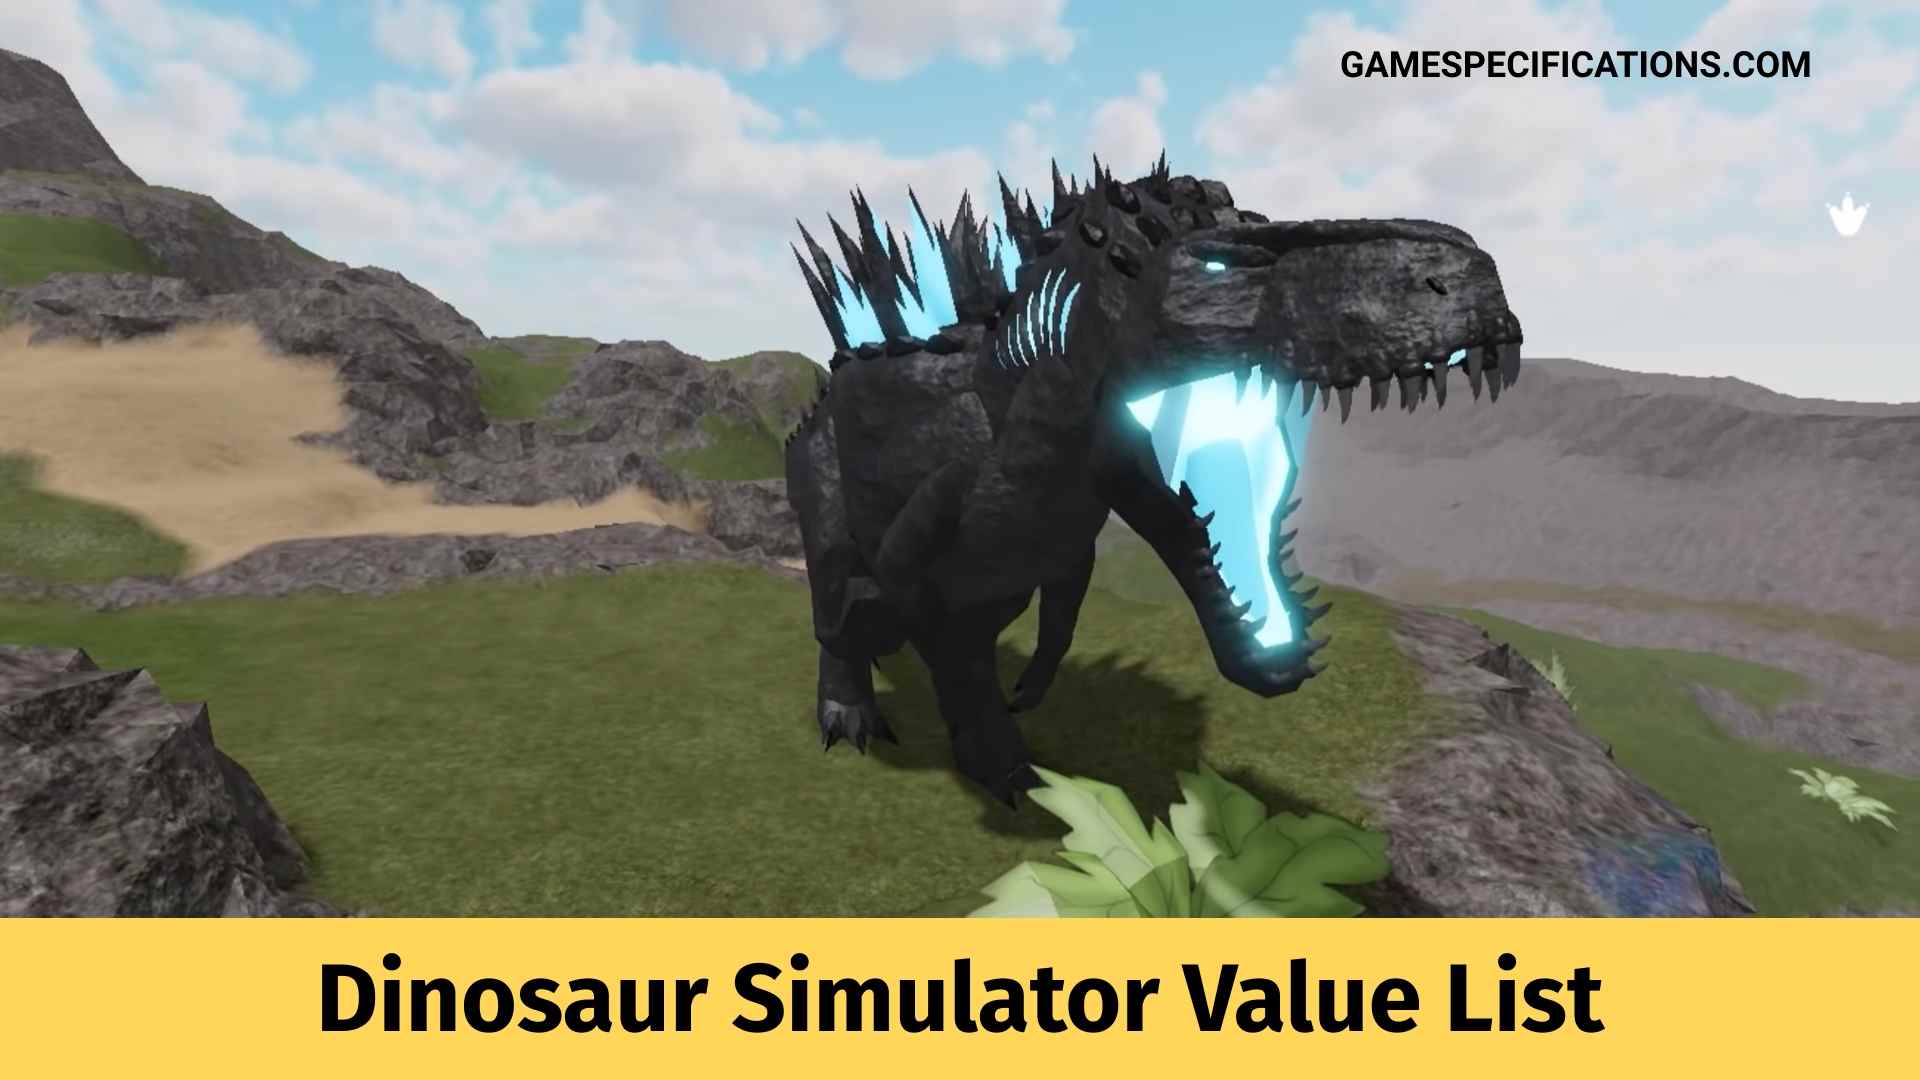 Roblox Dinosaur Simulator Value List For All Tiers 2021 Game Specifications - roblox dino simulator spino